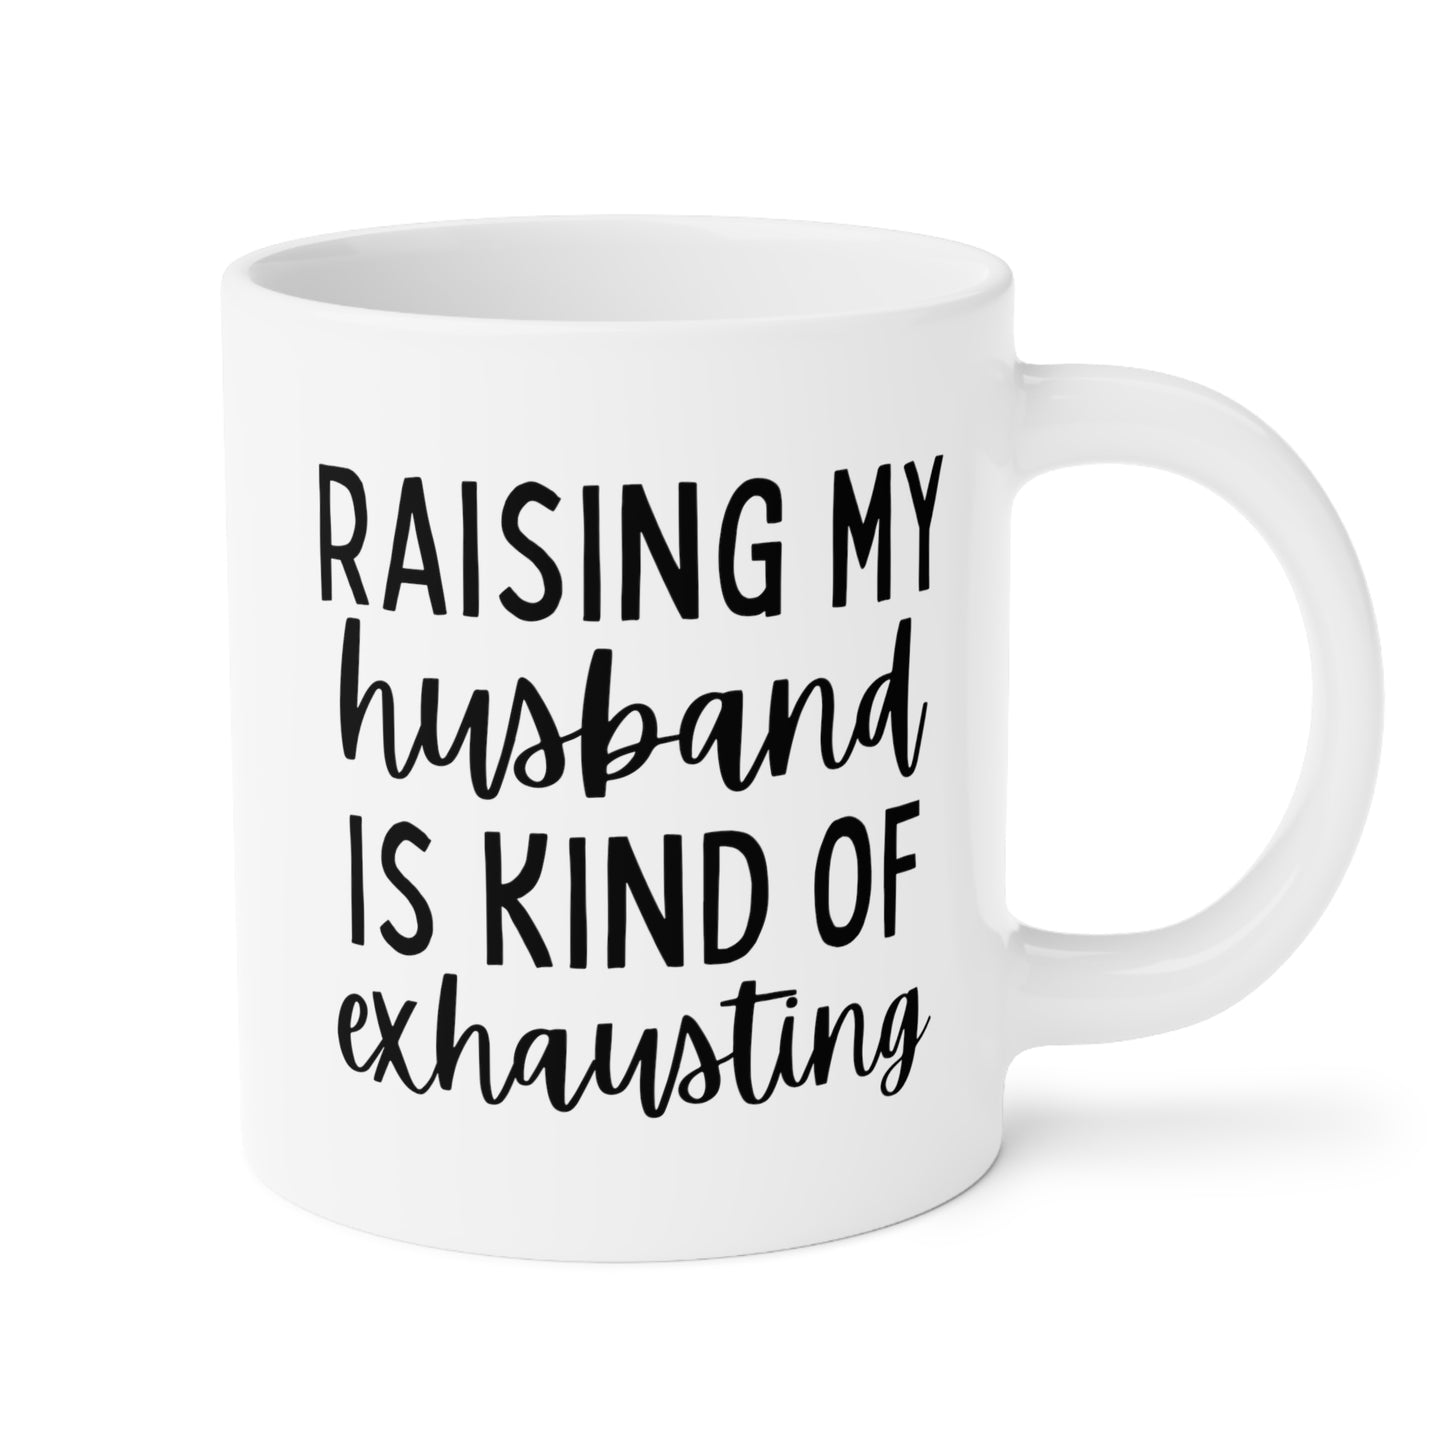 Raising My Husband is Kind of Exhausting 20oz white funny large coffee mug gift for wife mom bestie best friend sarcastic quote waveywares wavey wares wavywares wavy wares